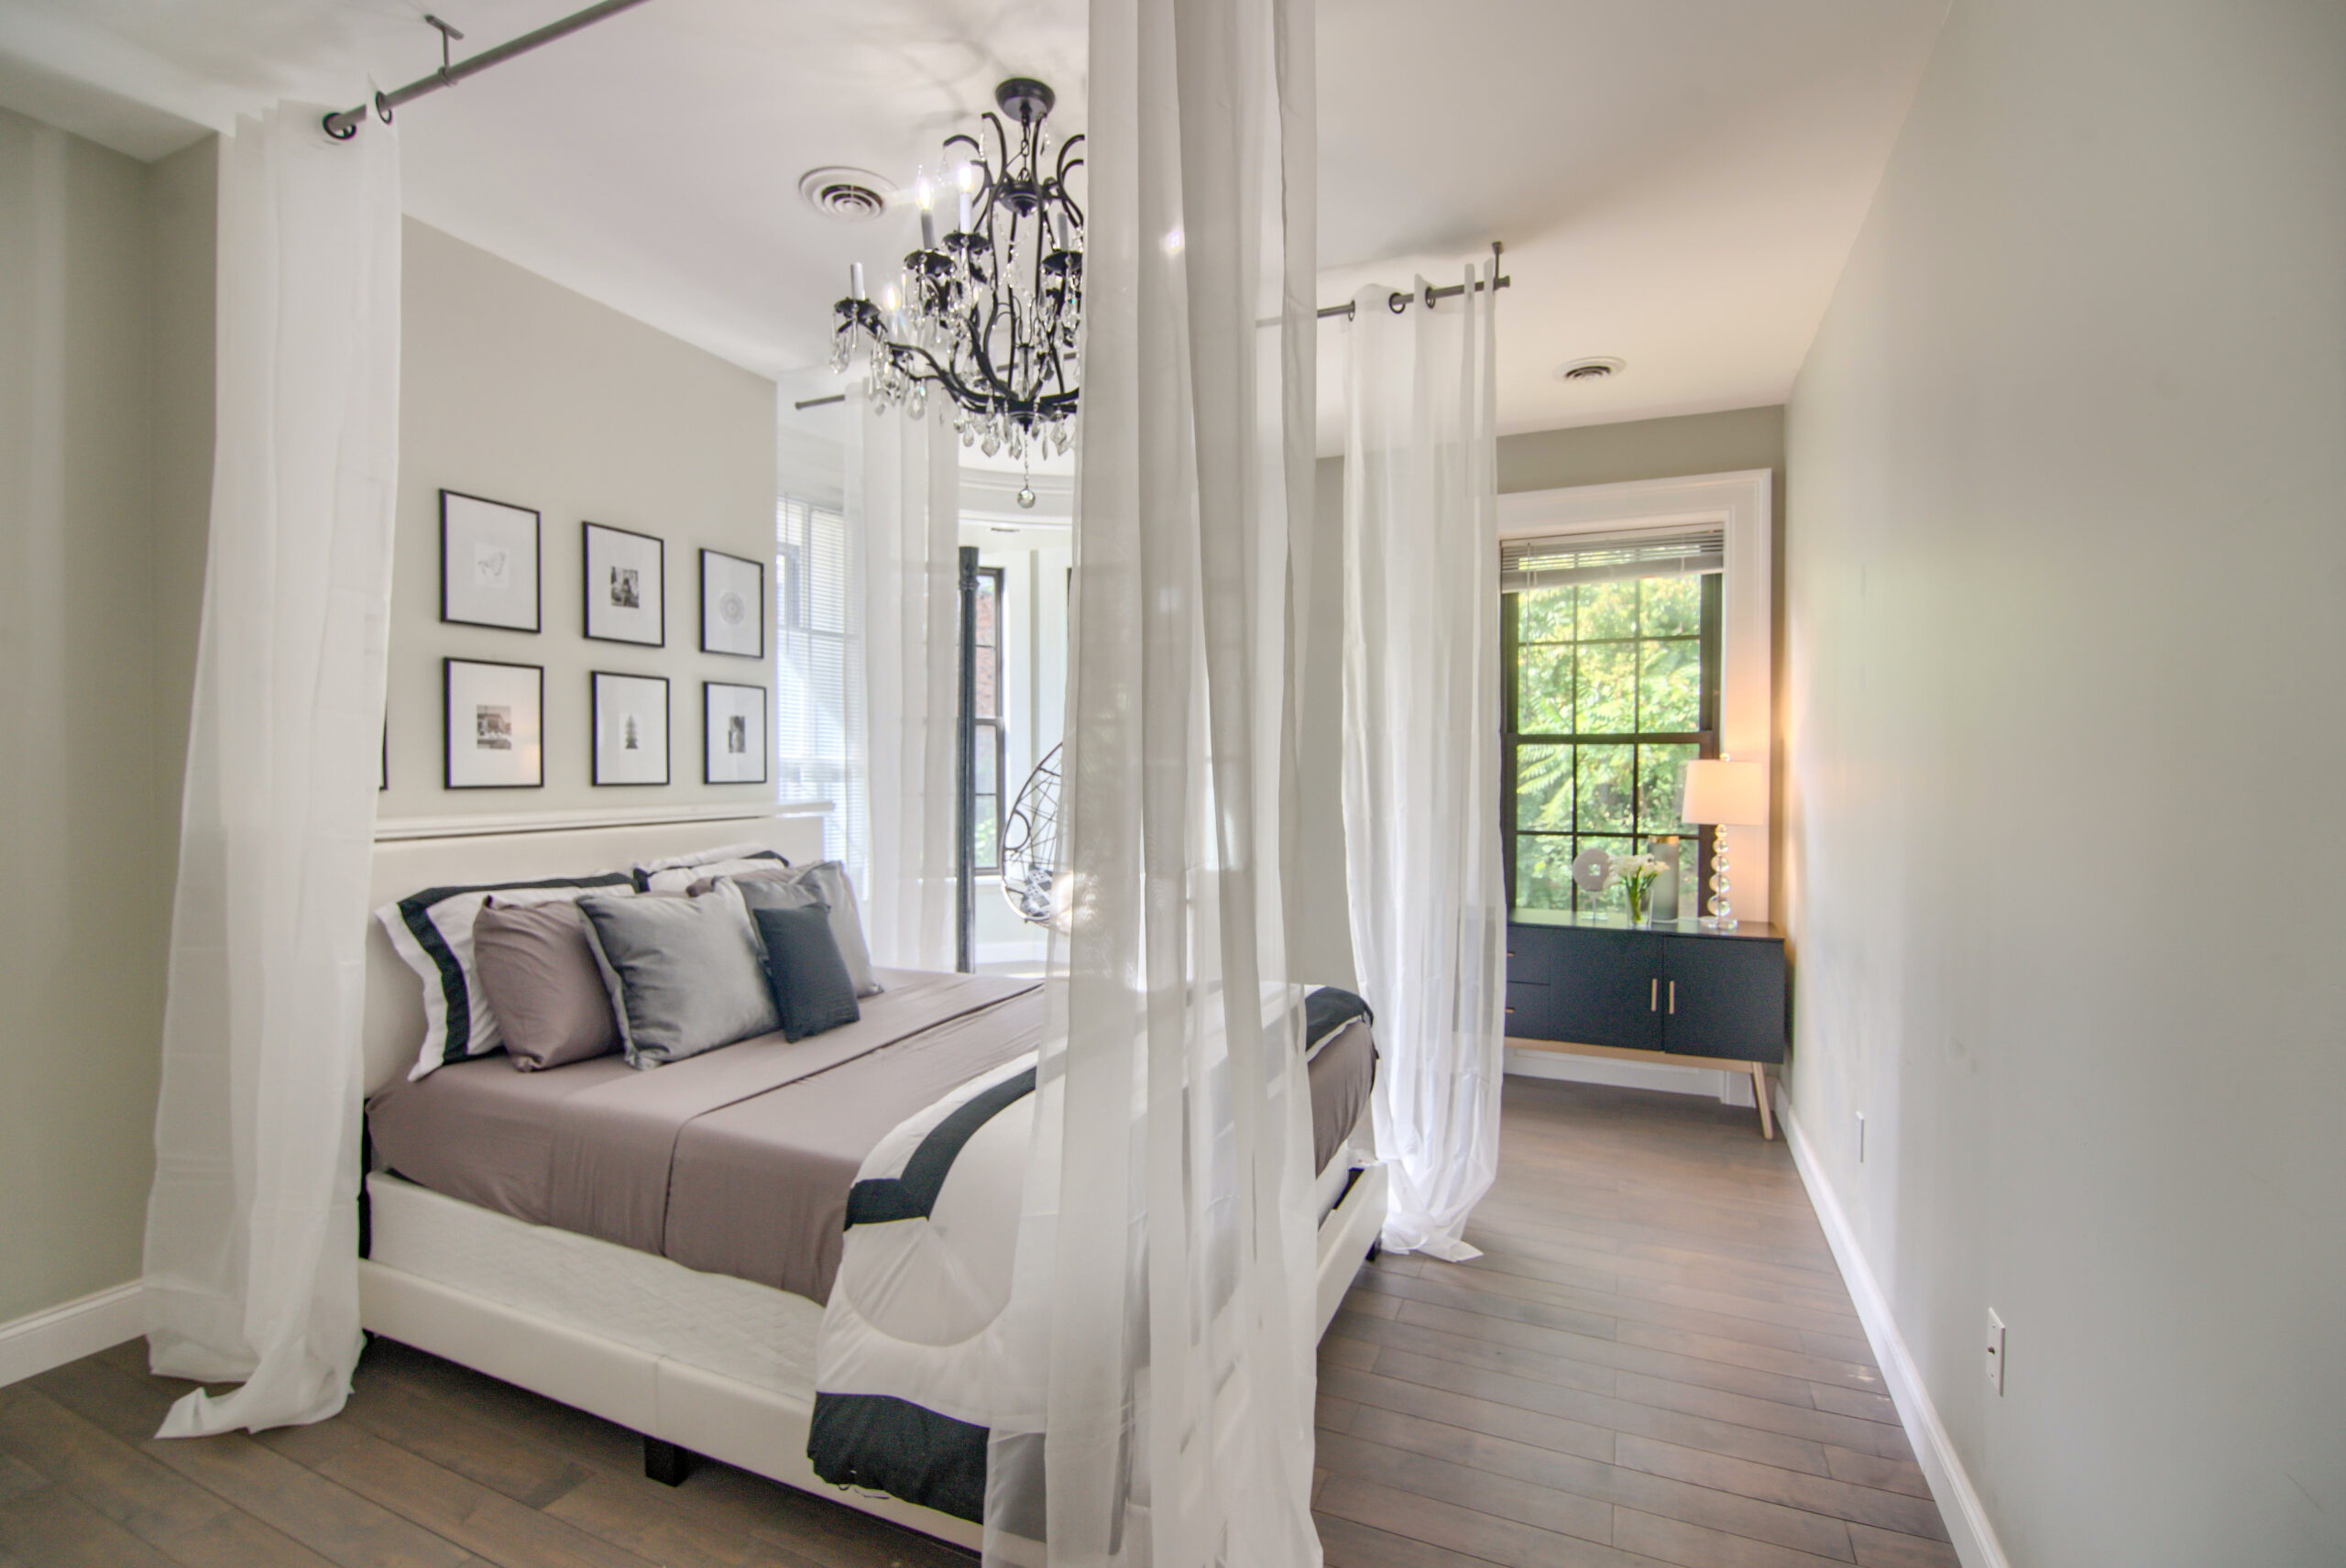 A bedroom with white walls and wooden floors.